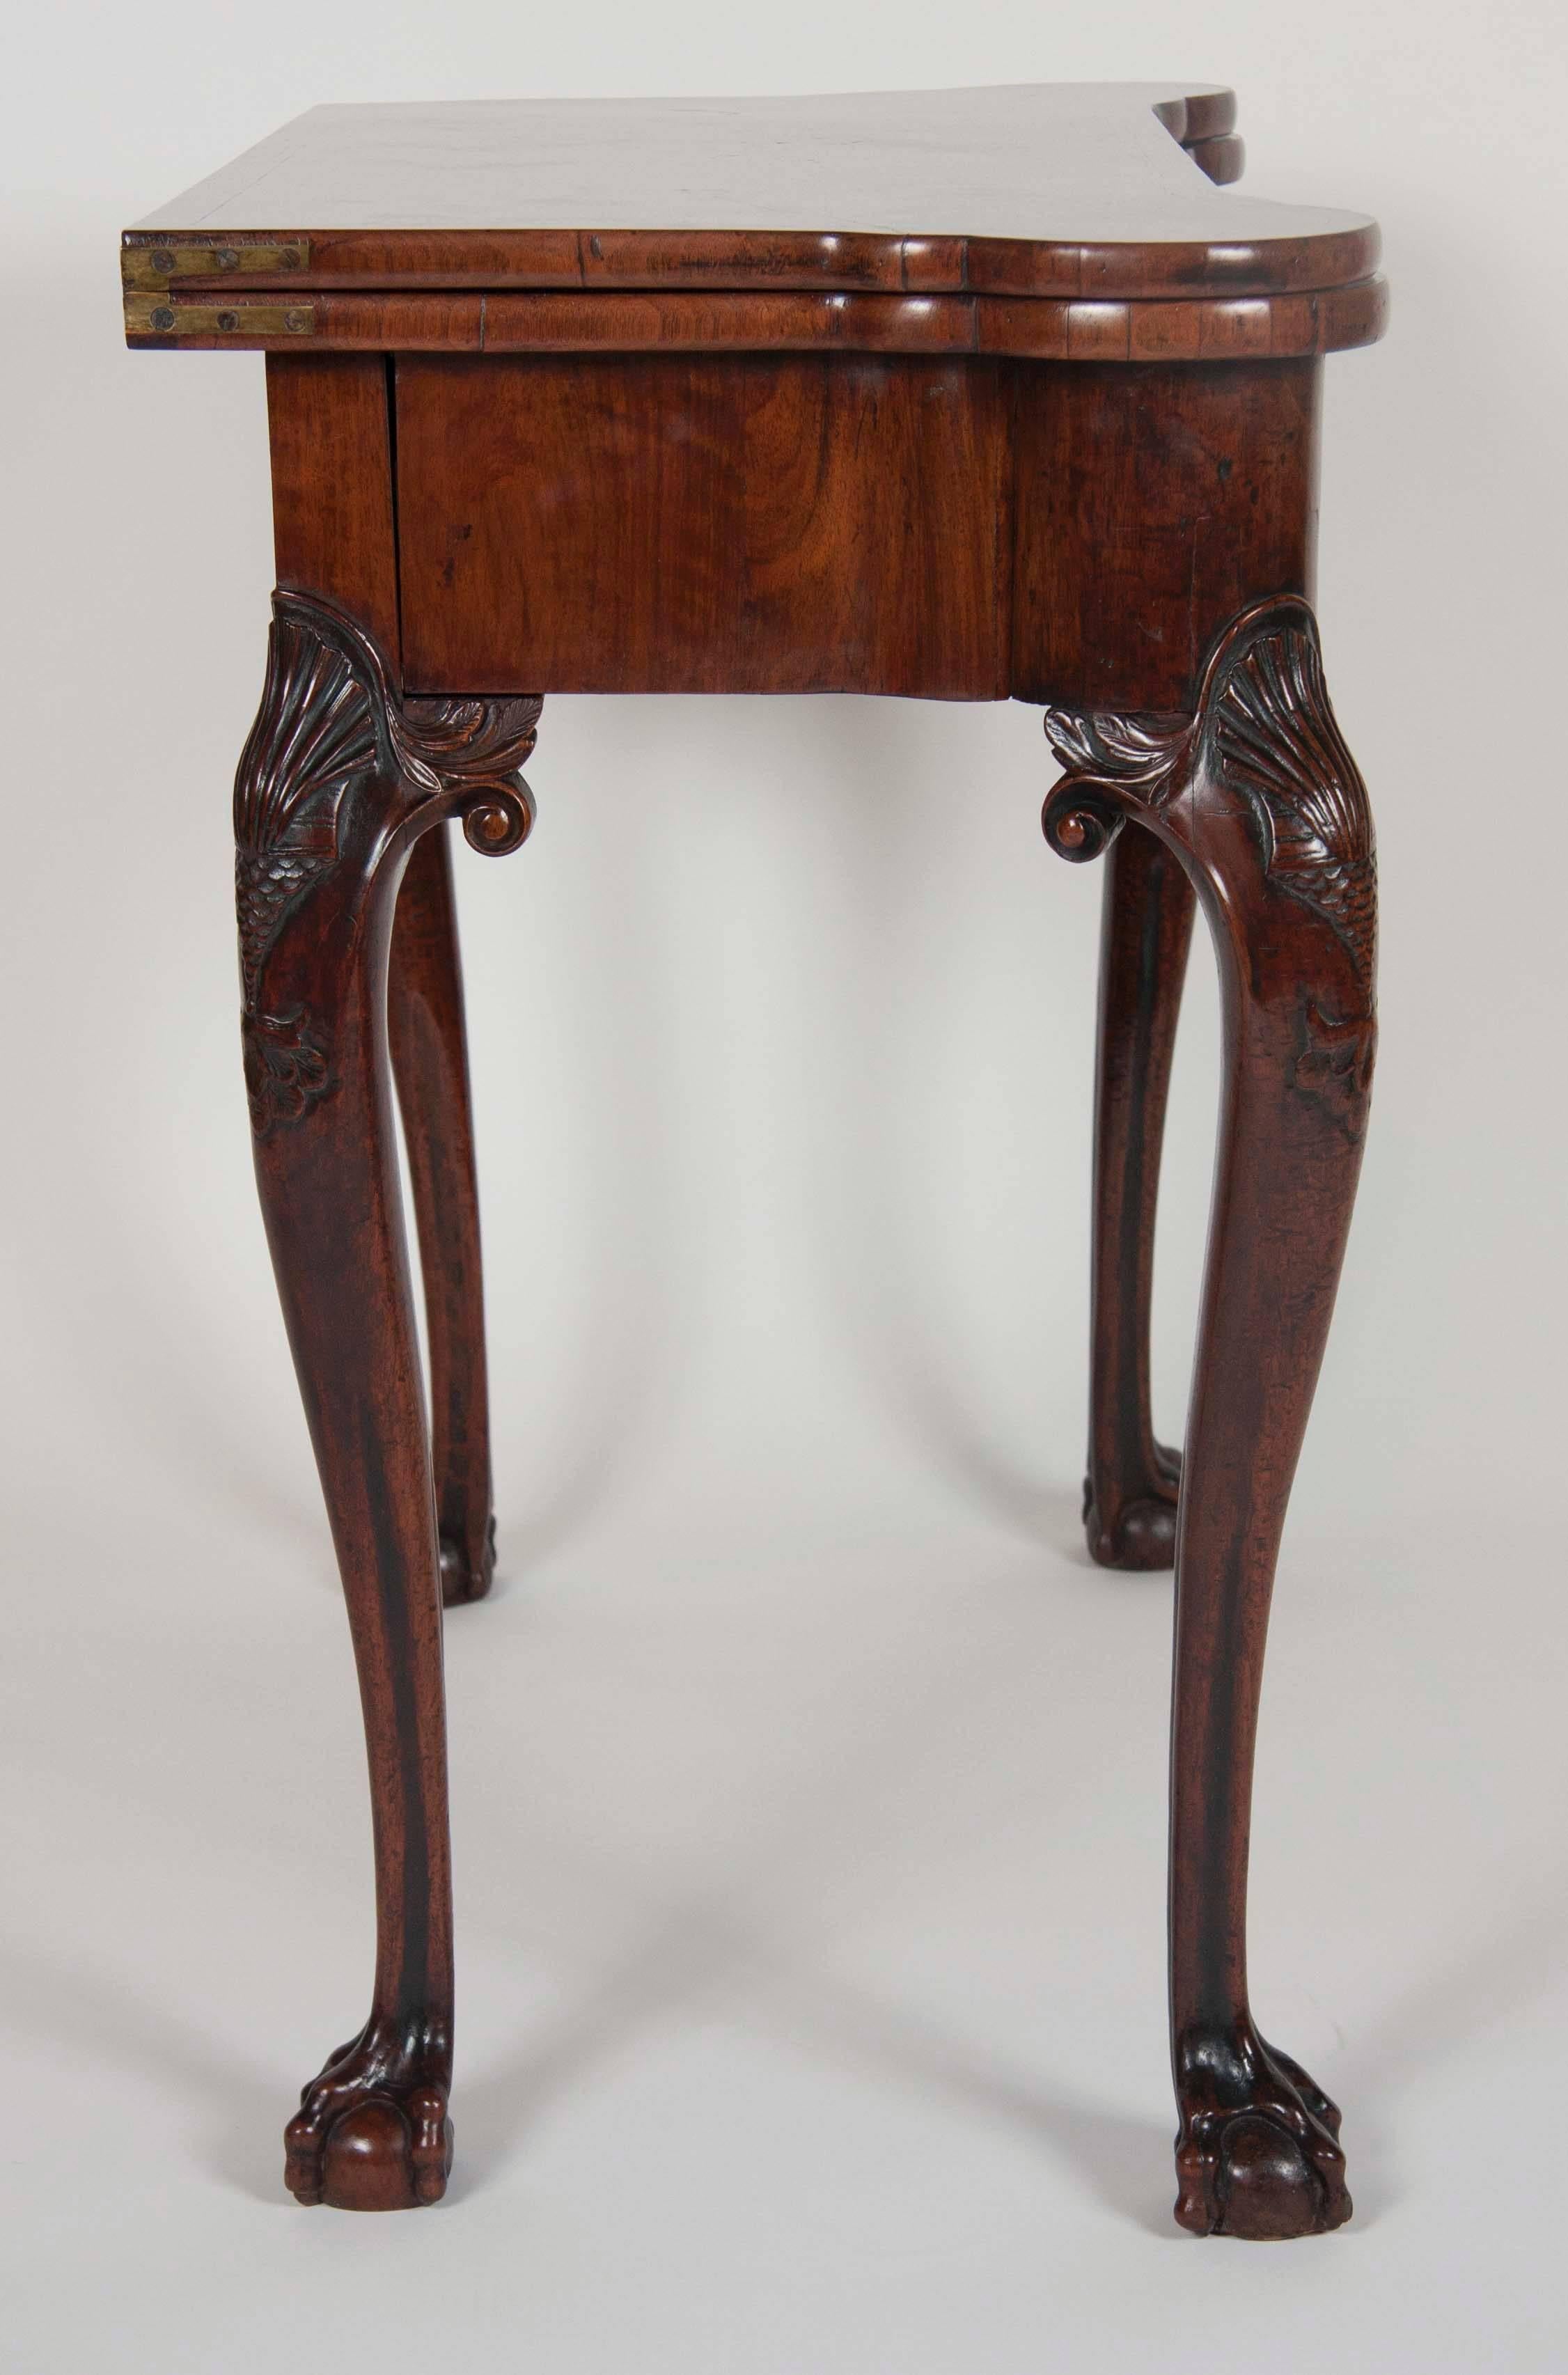 Early 18th Century George I Walnut Games Table